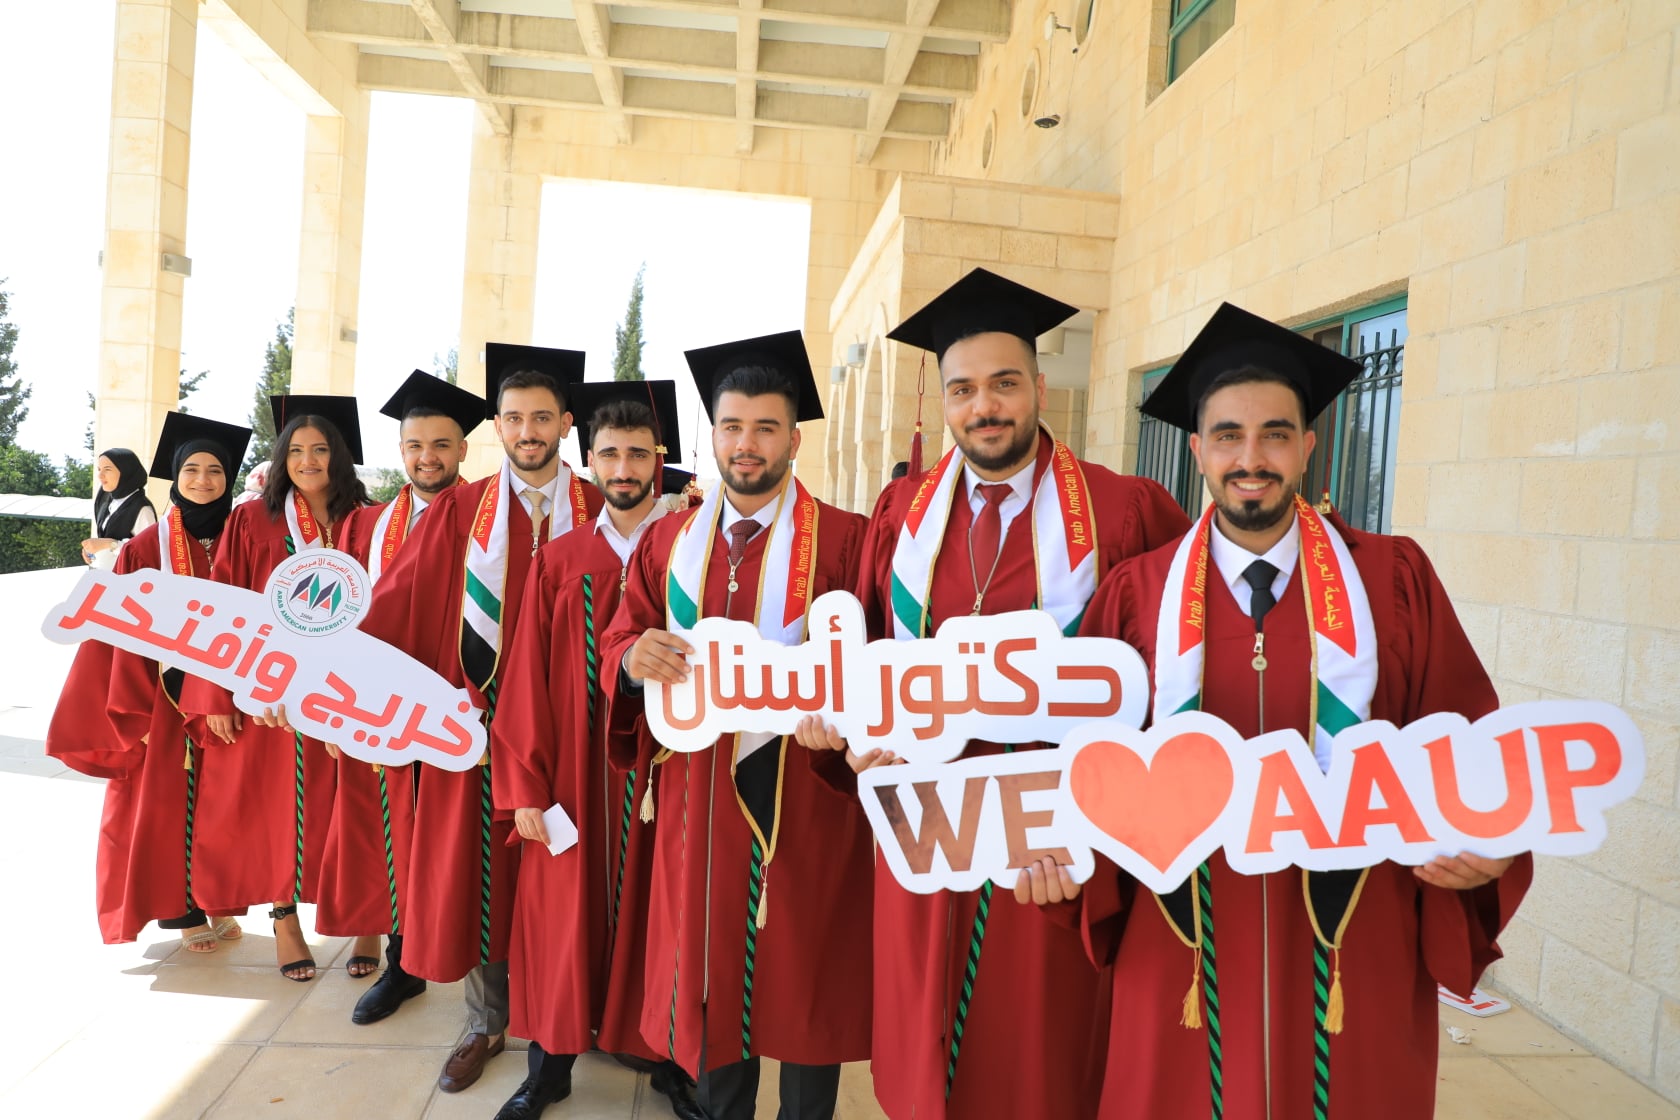 AAUP Celebrating the Graduation Ceremonies of its 17th and 18th Cohorts from the Faculties of Dentistry, Engineering and IT and Sciences